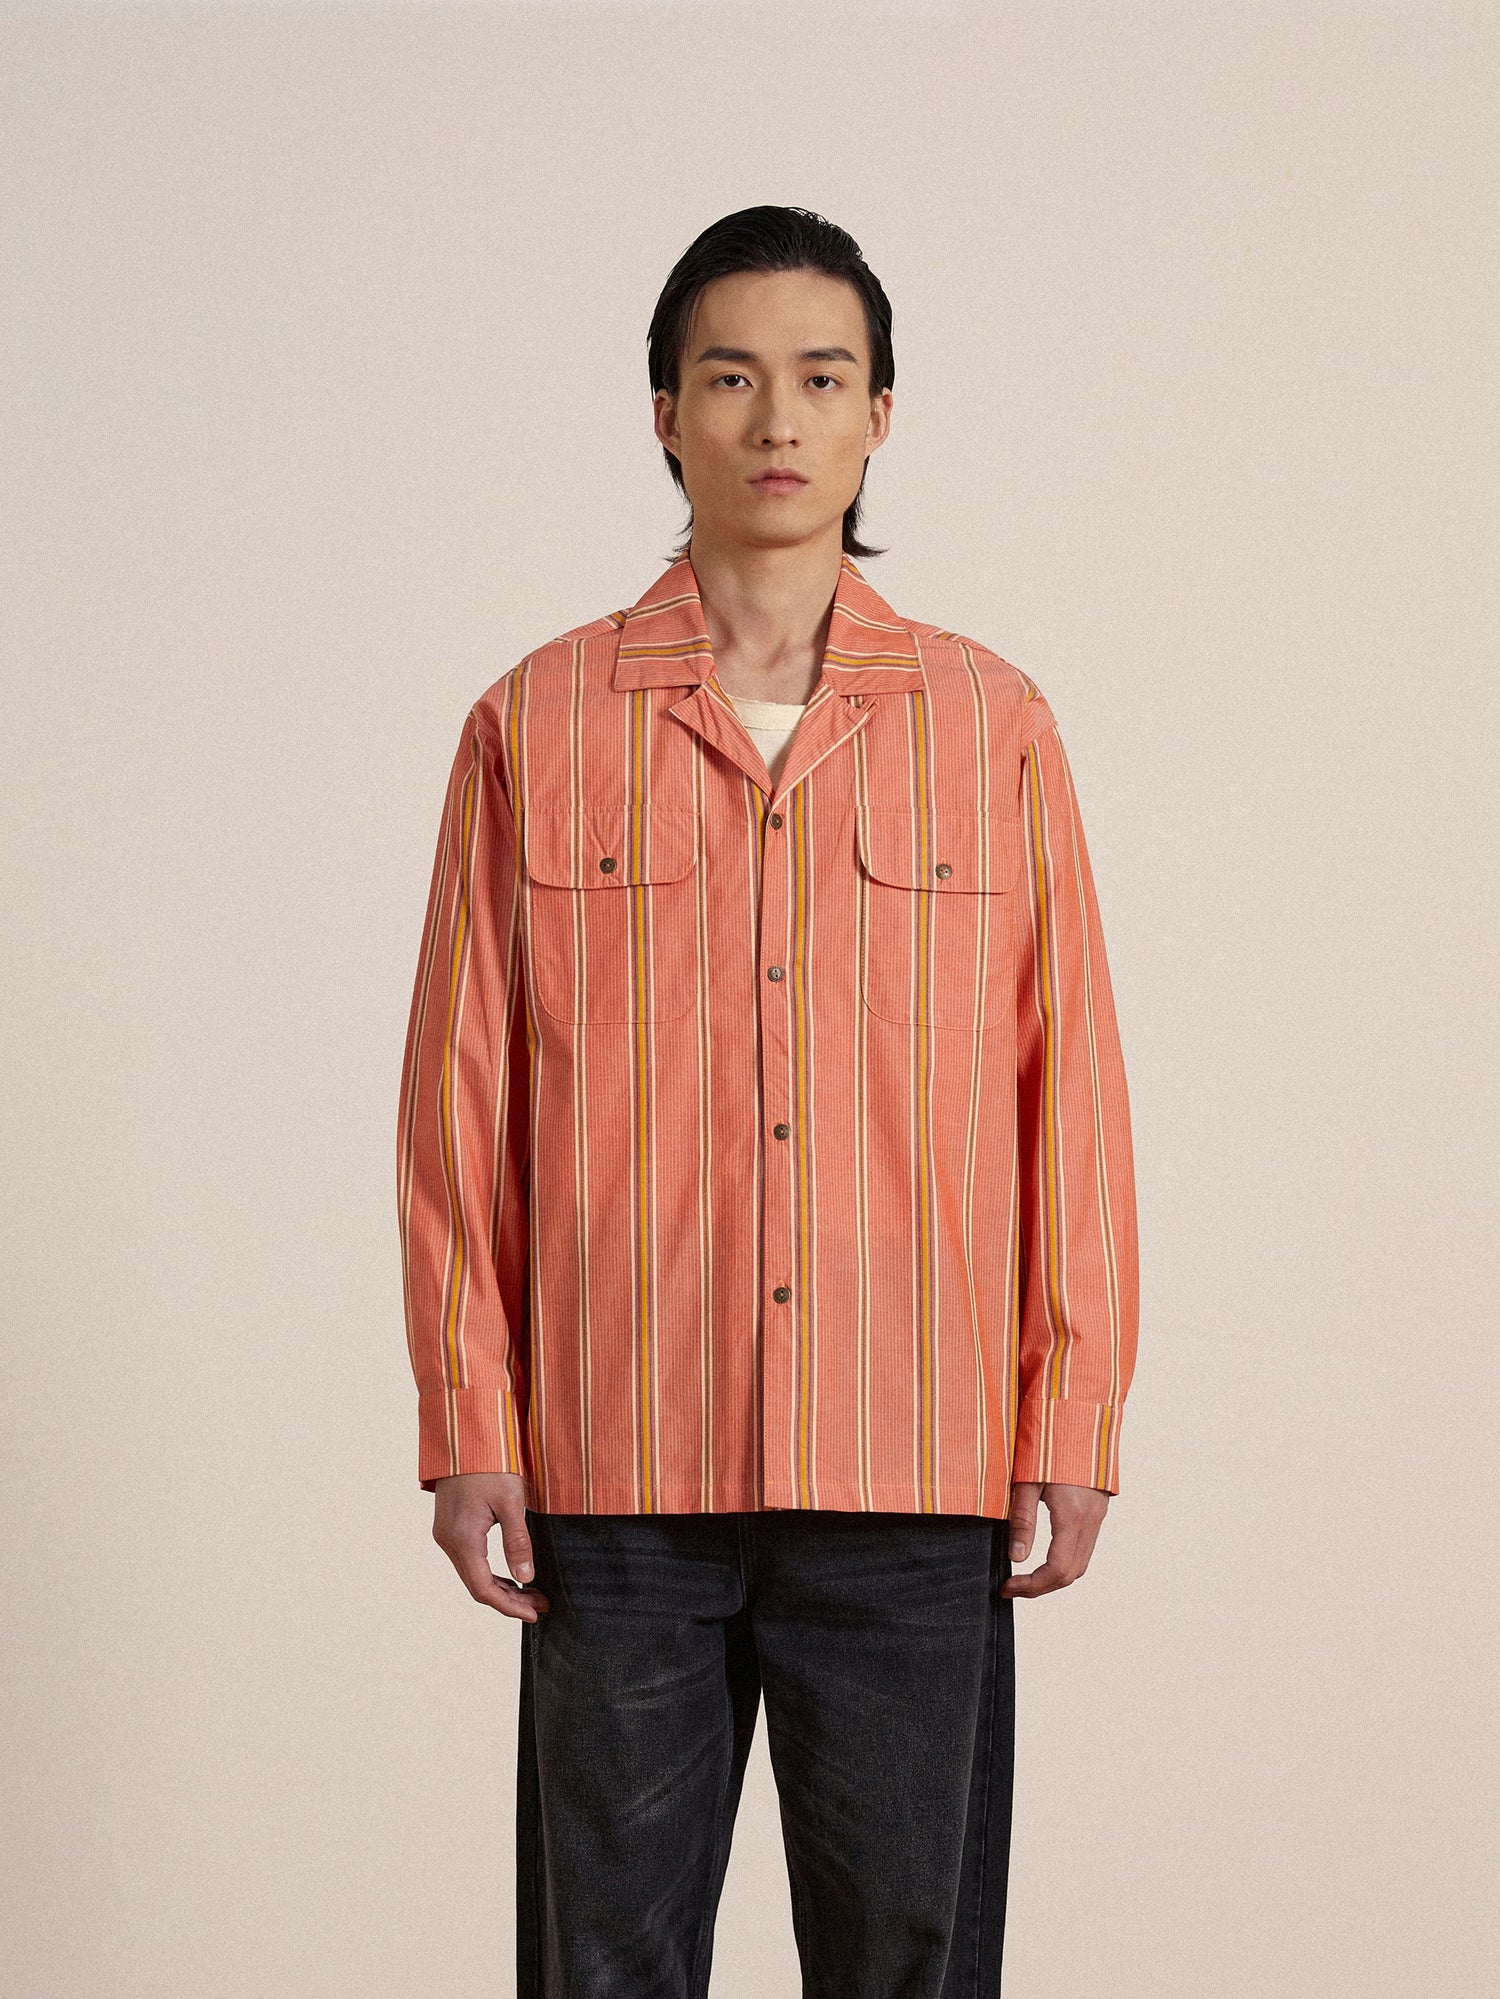 A man wearing an orange Found Stripe Citrus LS Camp Shirt and jeans.